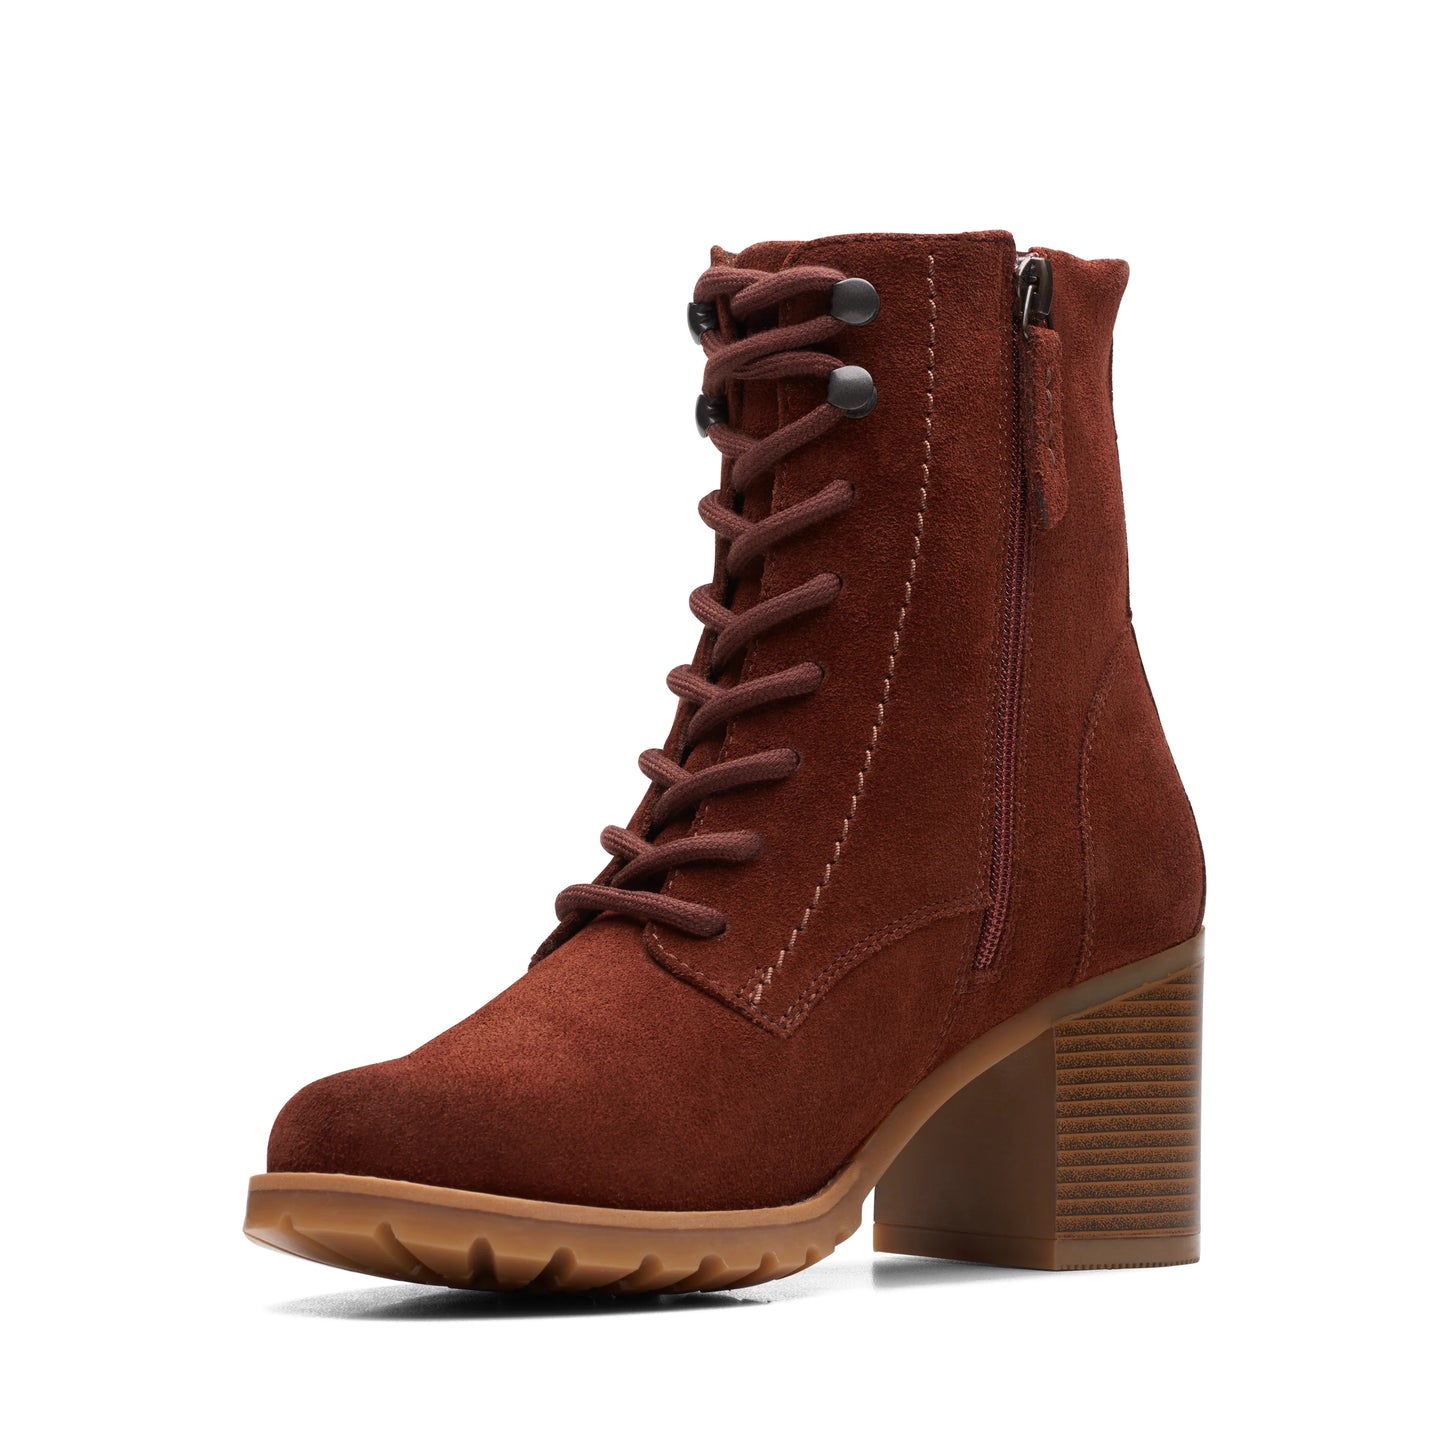 CLARKS | BOTAS MUJER | CLARKWELL LACE BRITISHTANWLINED | MARRÓN